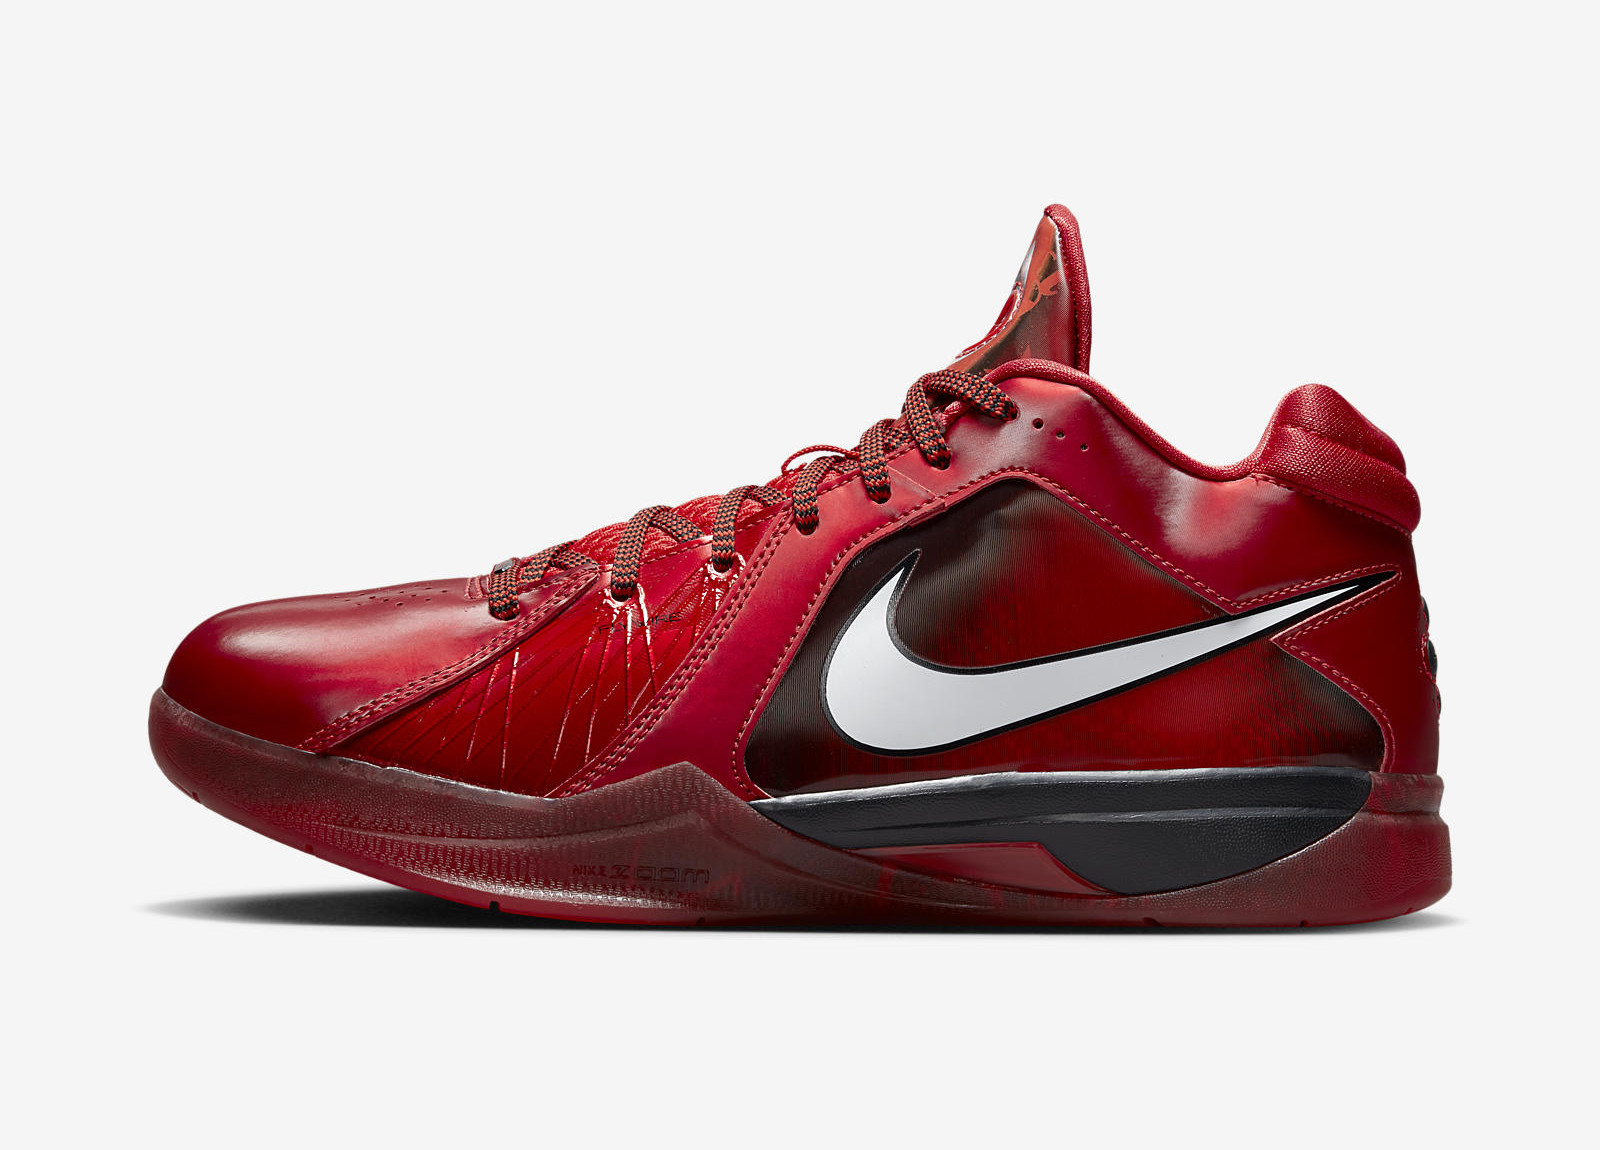 Nike Zoom KD 3
« Challenge Red »